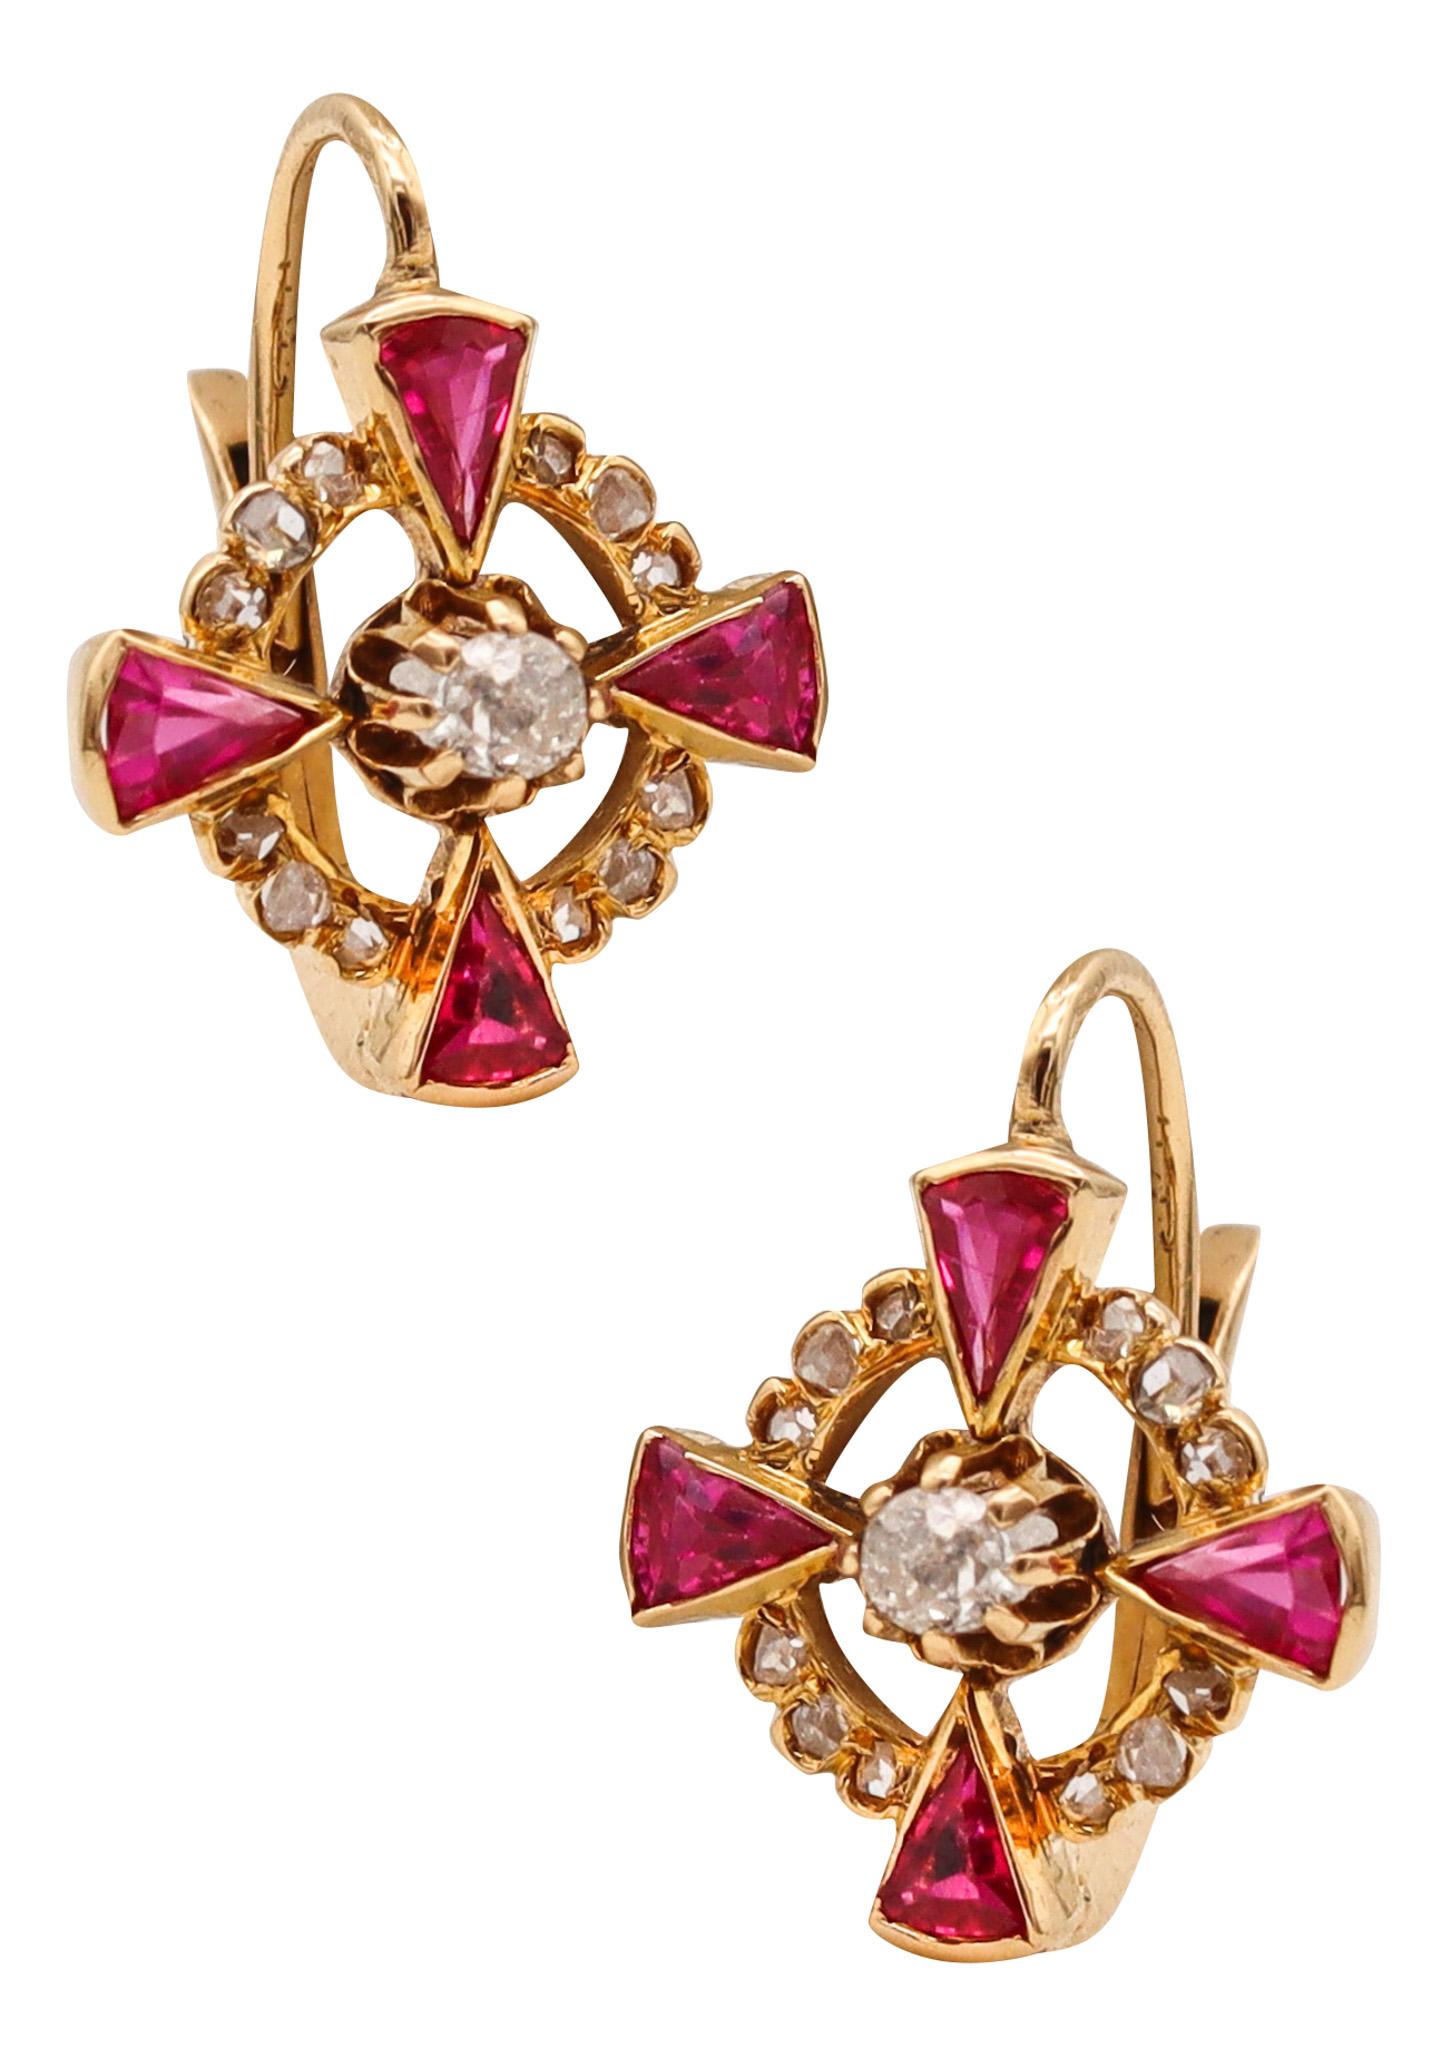 Edwardian belle epoque bow-brooch.

Very handsome pair from the Belle Epoque period, created during the Edwardian era (1901-1910), back in the 1905. This beautiful pair of dangle earrings has been carefully crafted in the shape of Maltese crosses in